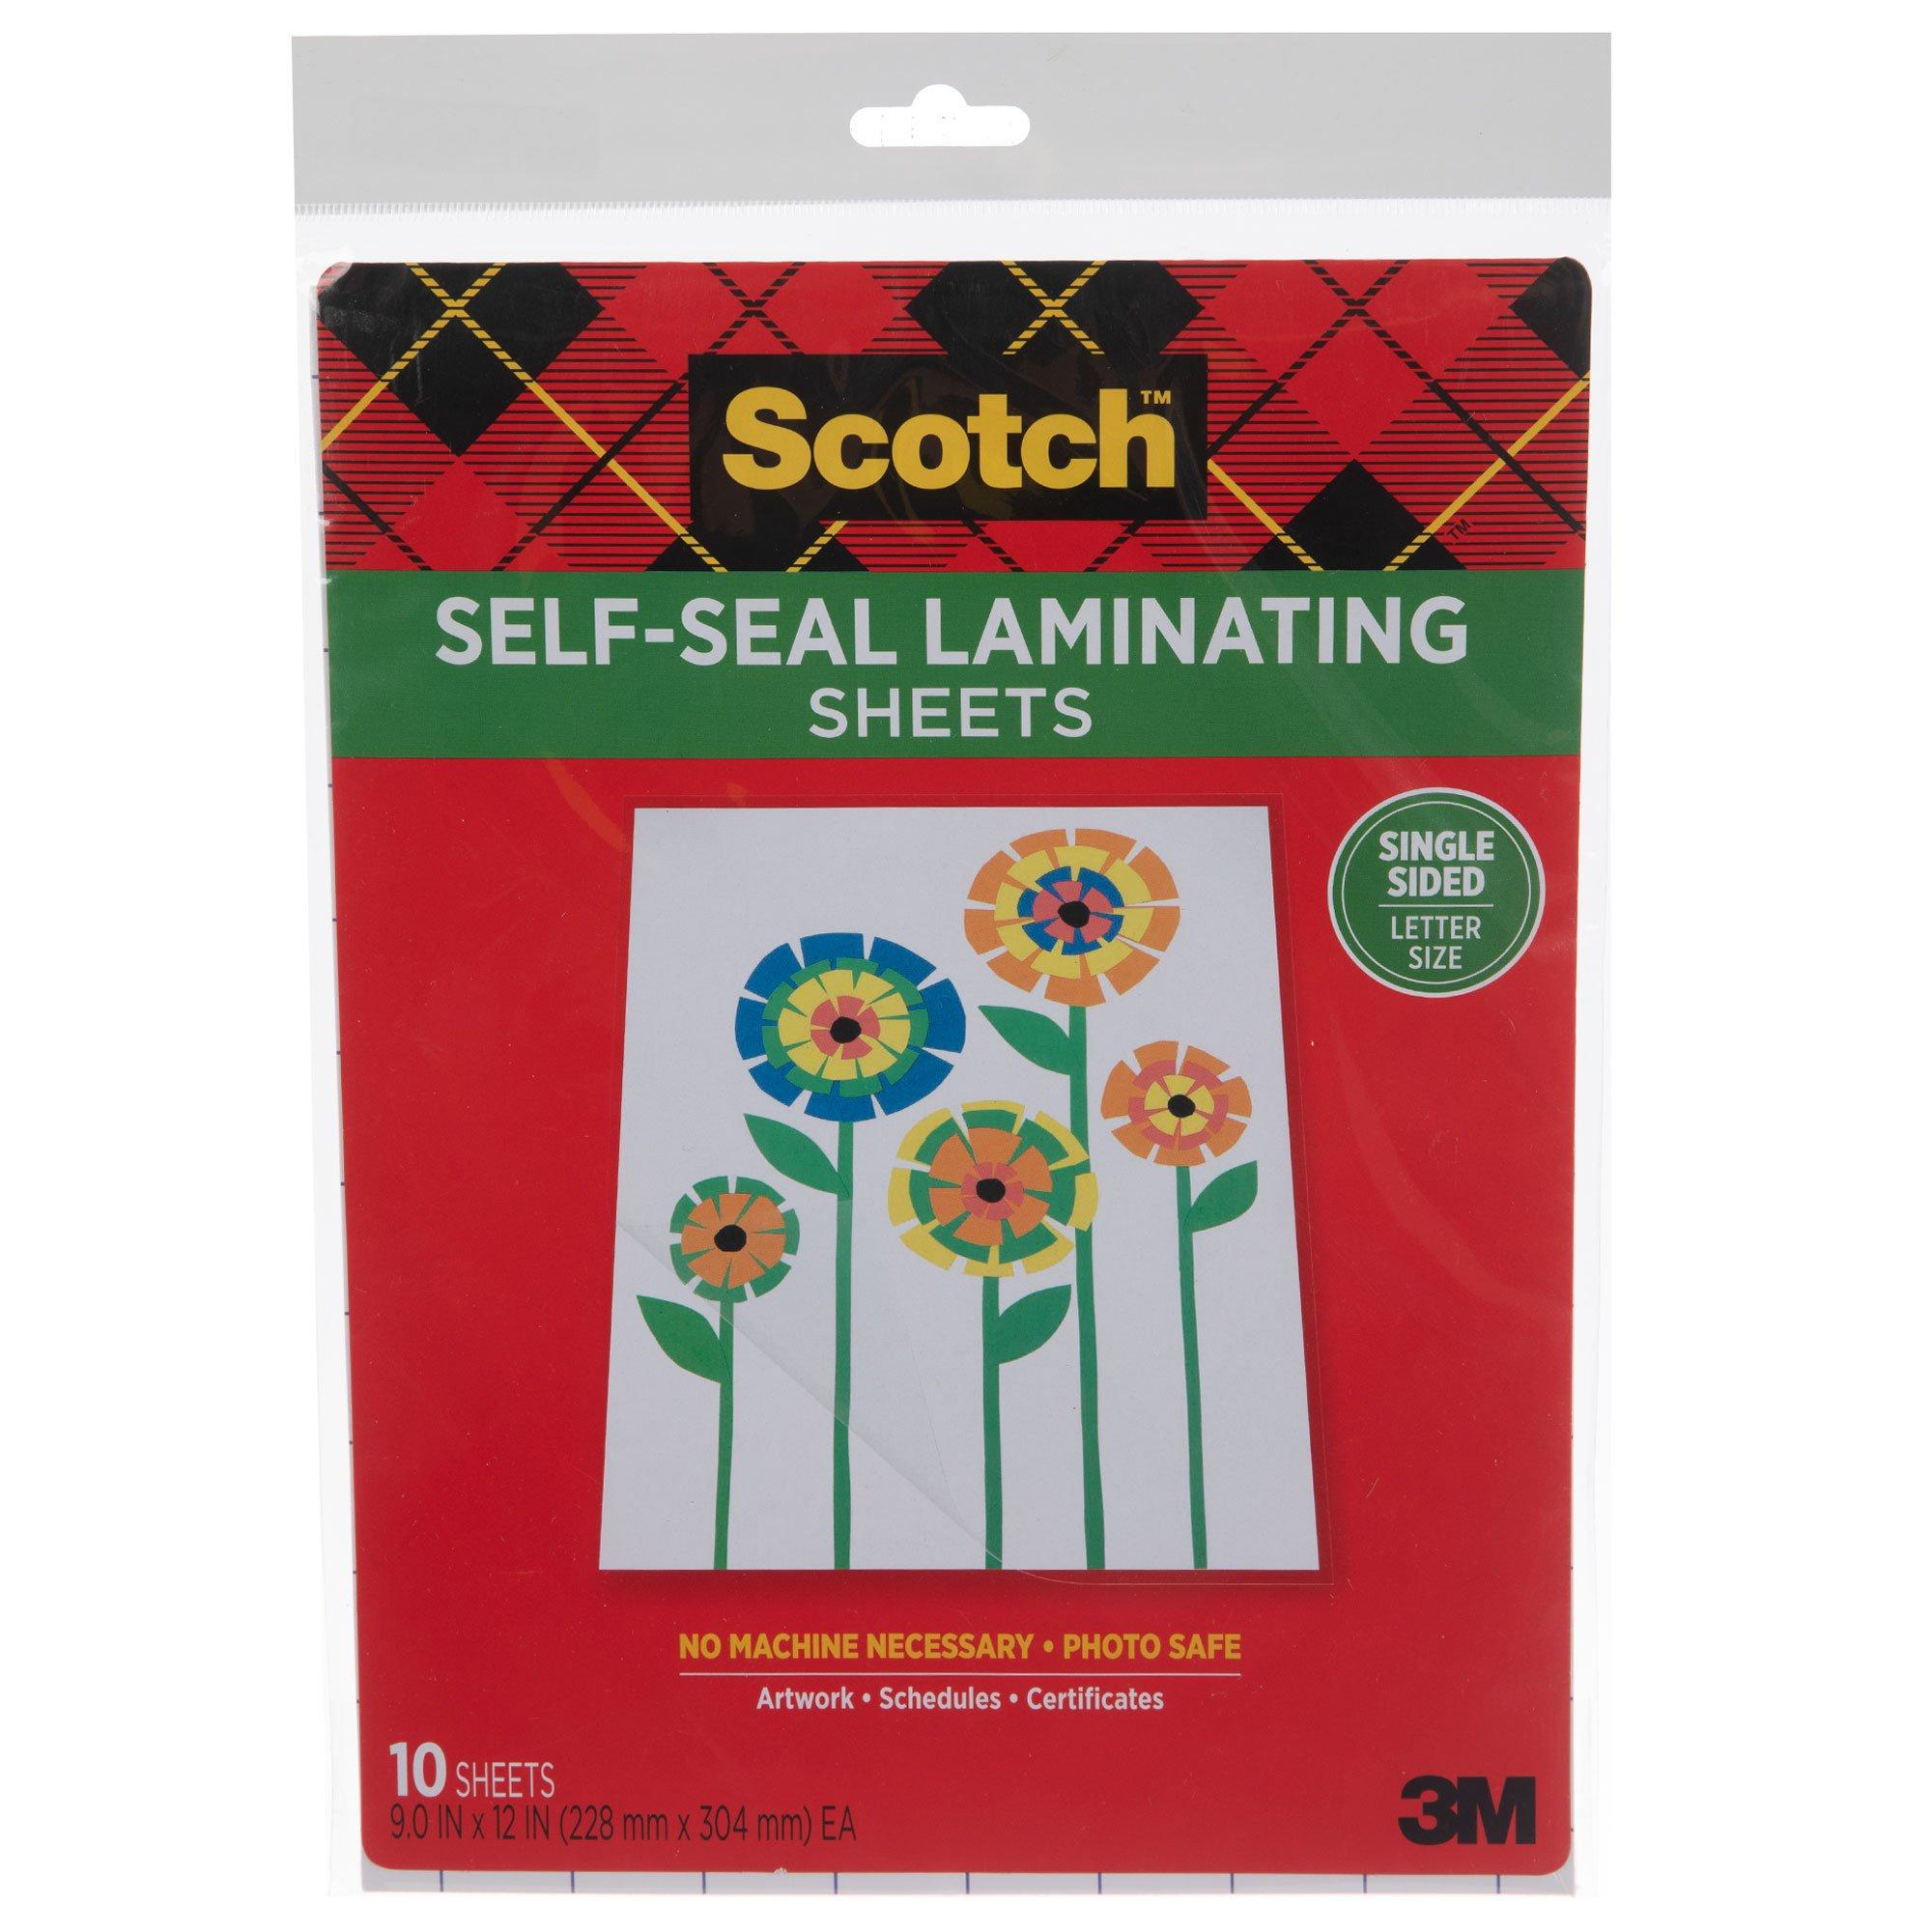 How To Use Self Seal Laminating Sheets: Laminate Documents On The Go 